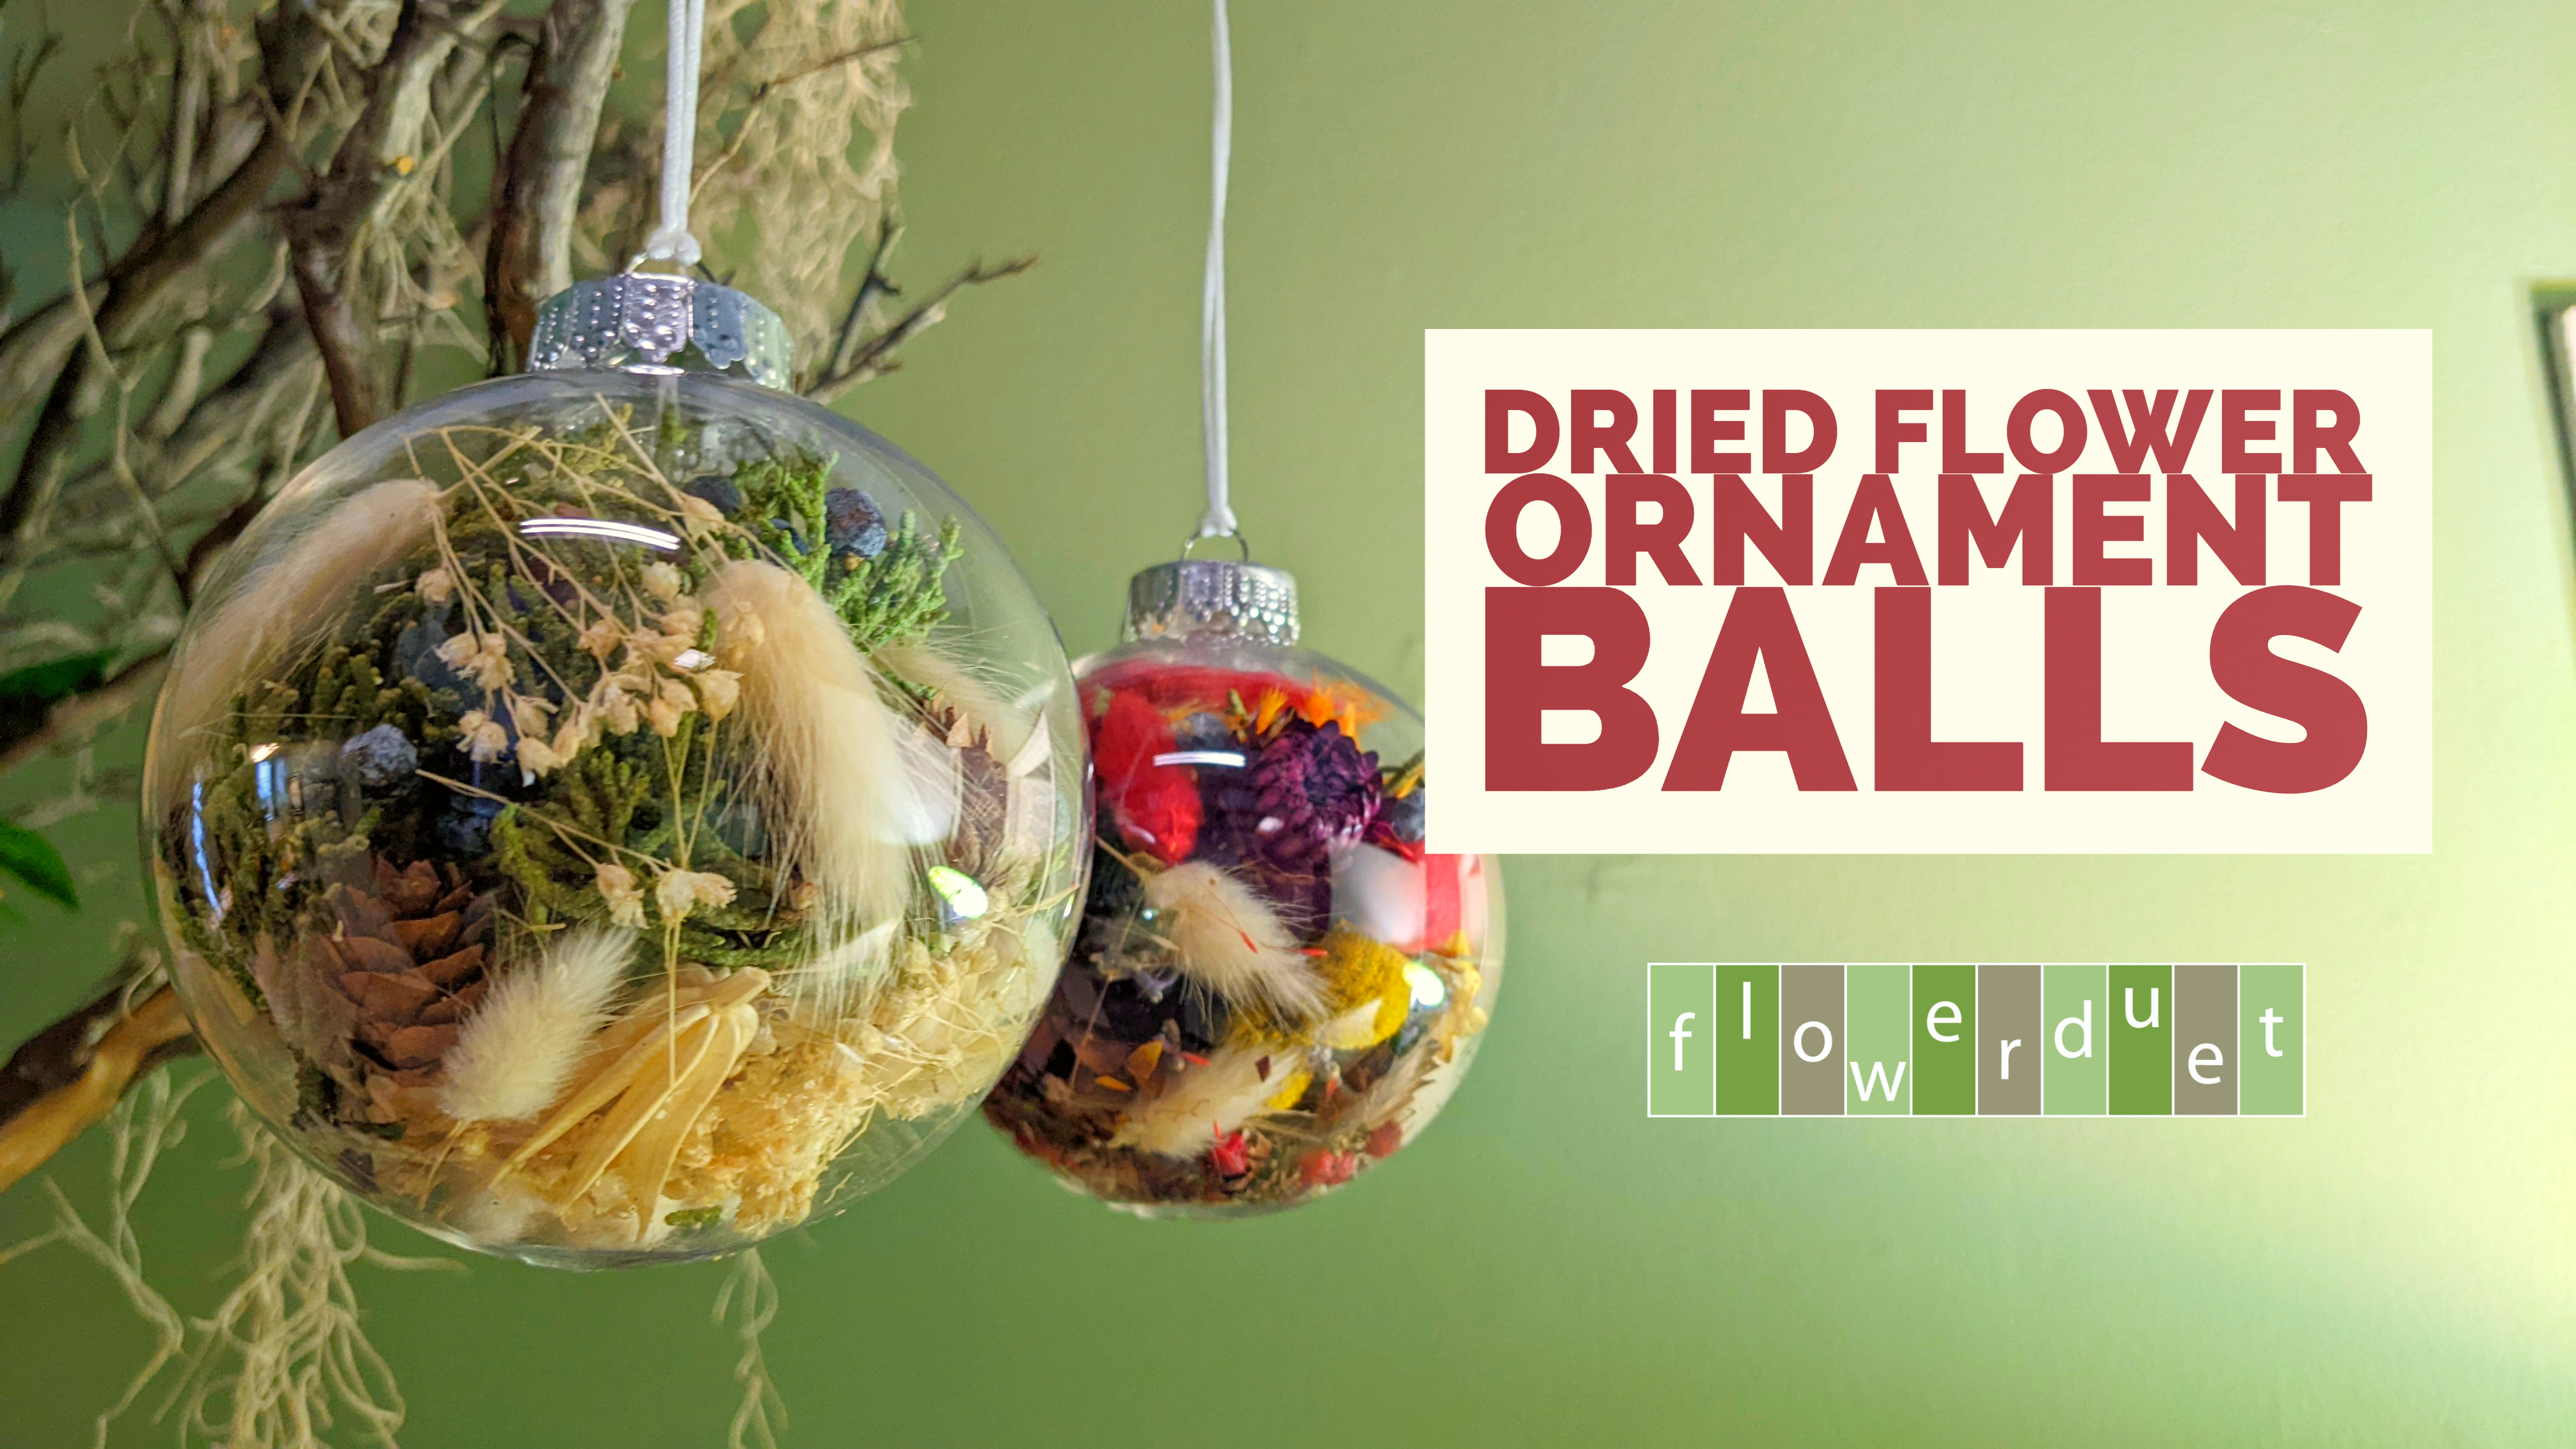 Ornament spheres with dried florals